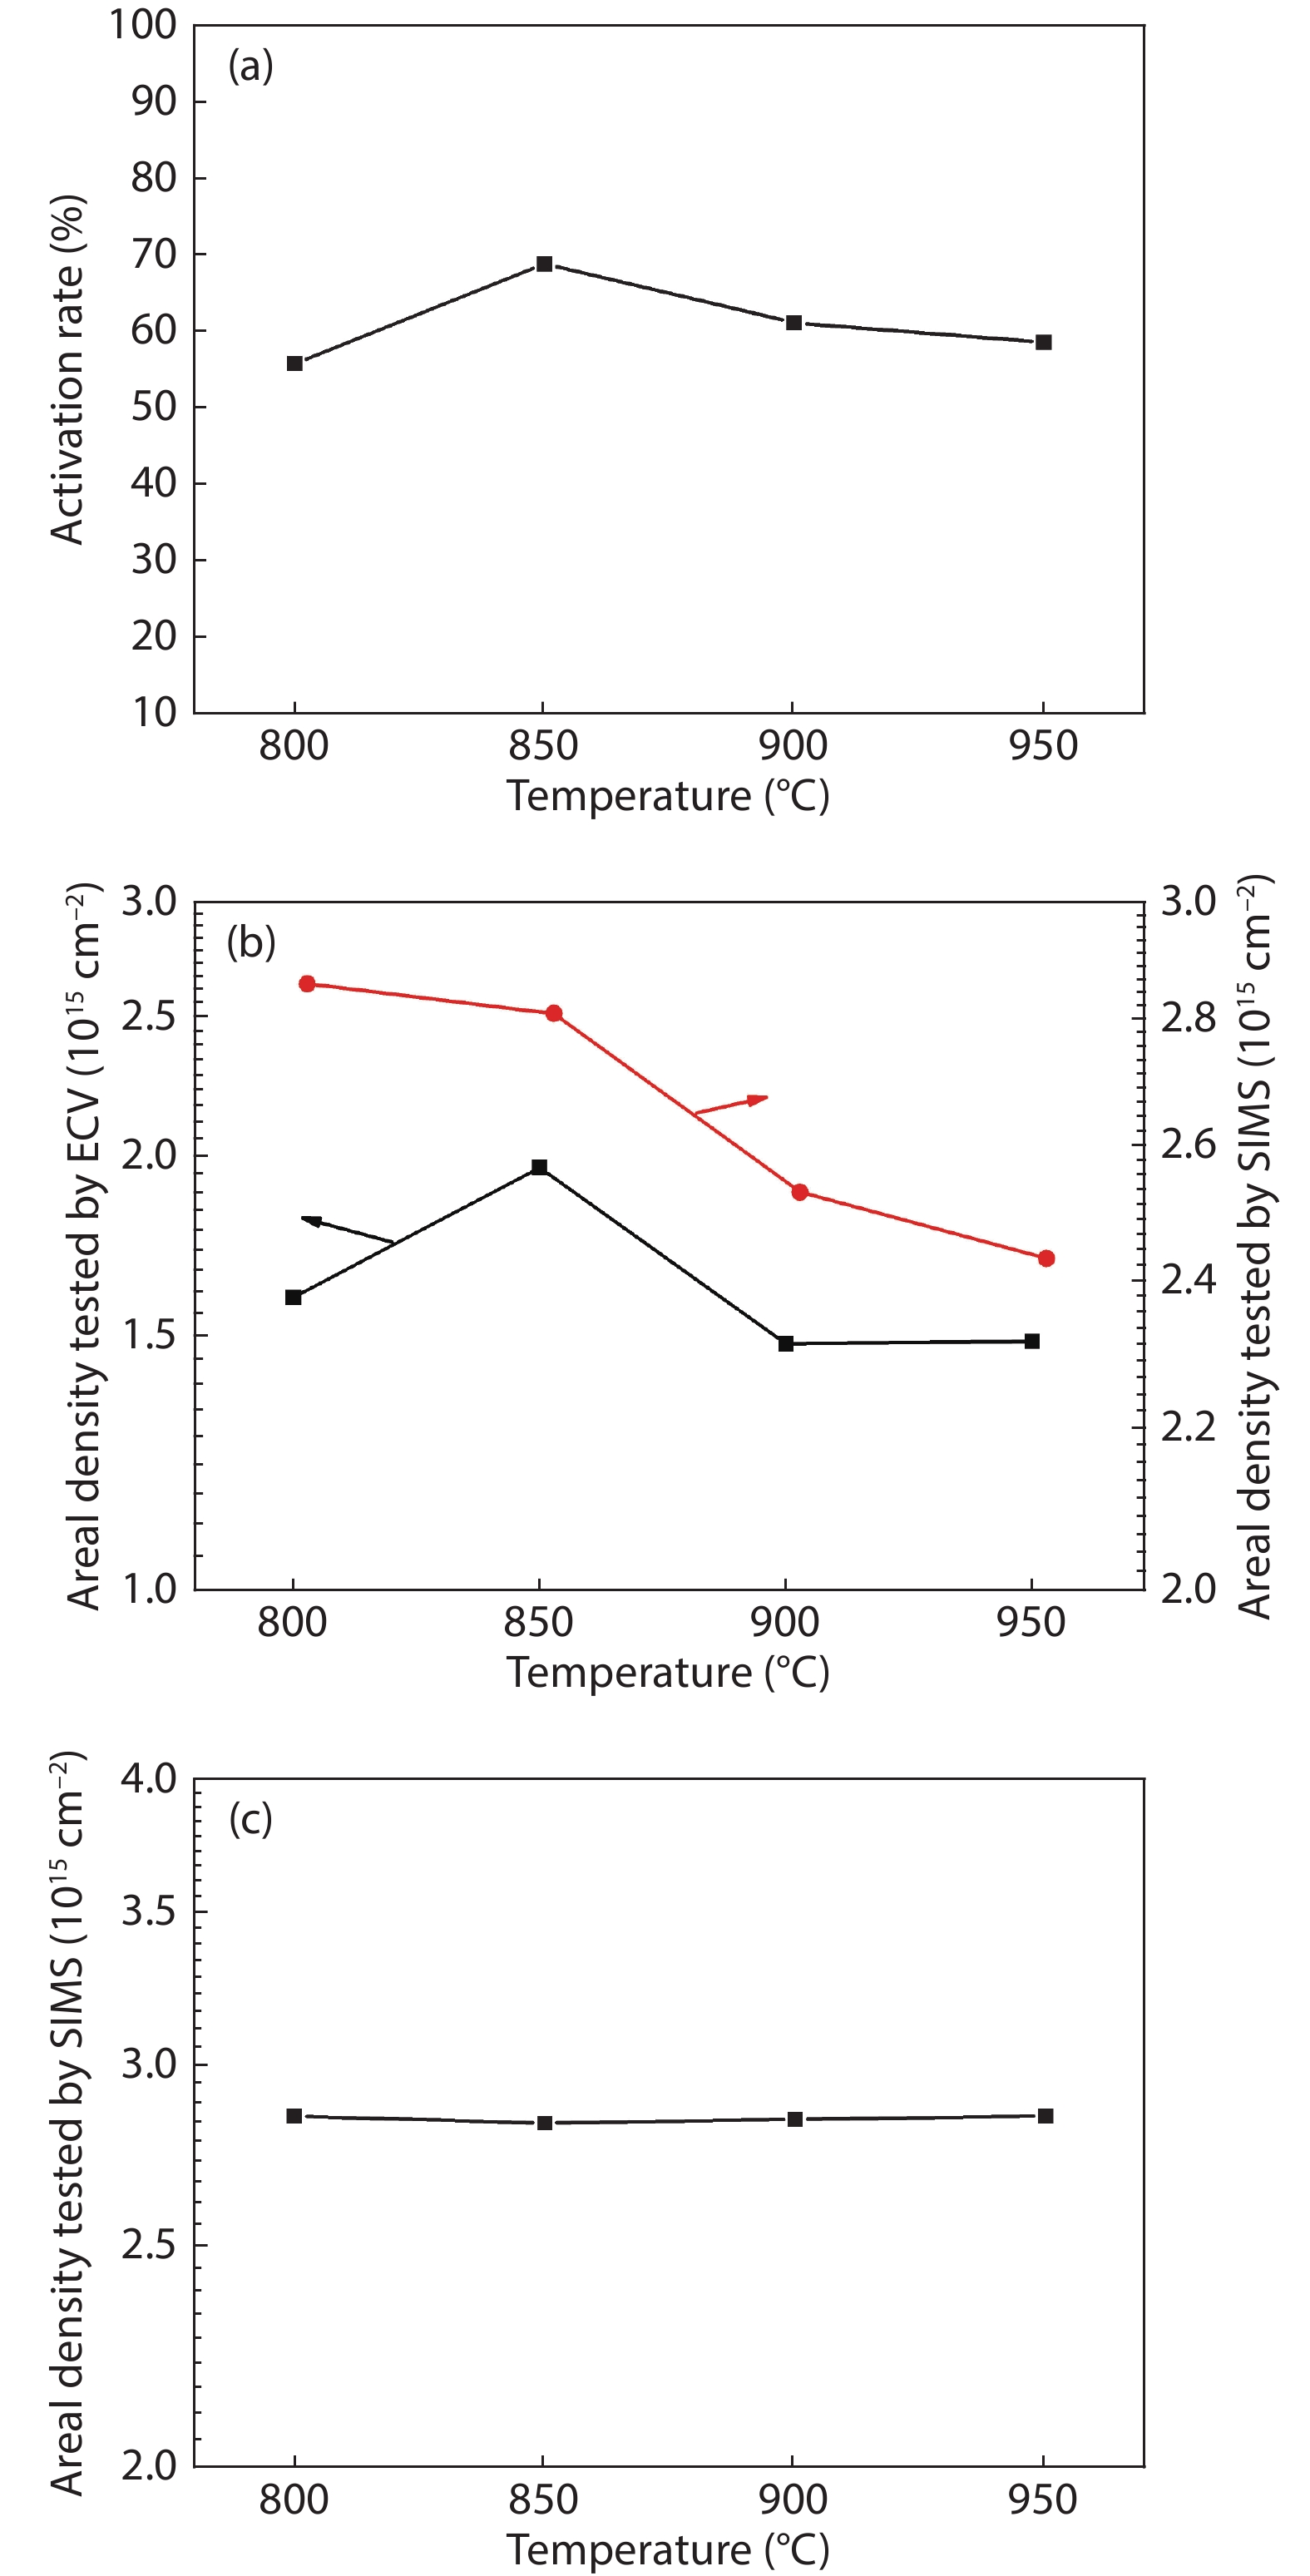 (a) The activation rate of phosphorus at different temperatures. (b) Areal density of phosphorus of ECV and SIMS before the junction depth at different temperatures. (c) Areal density of phosphorus of SIMS at different temperatures.